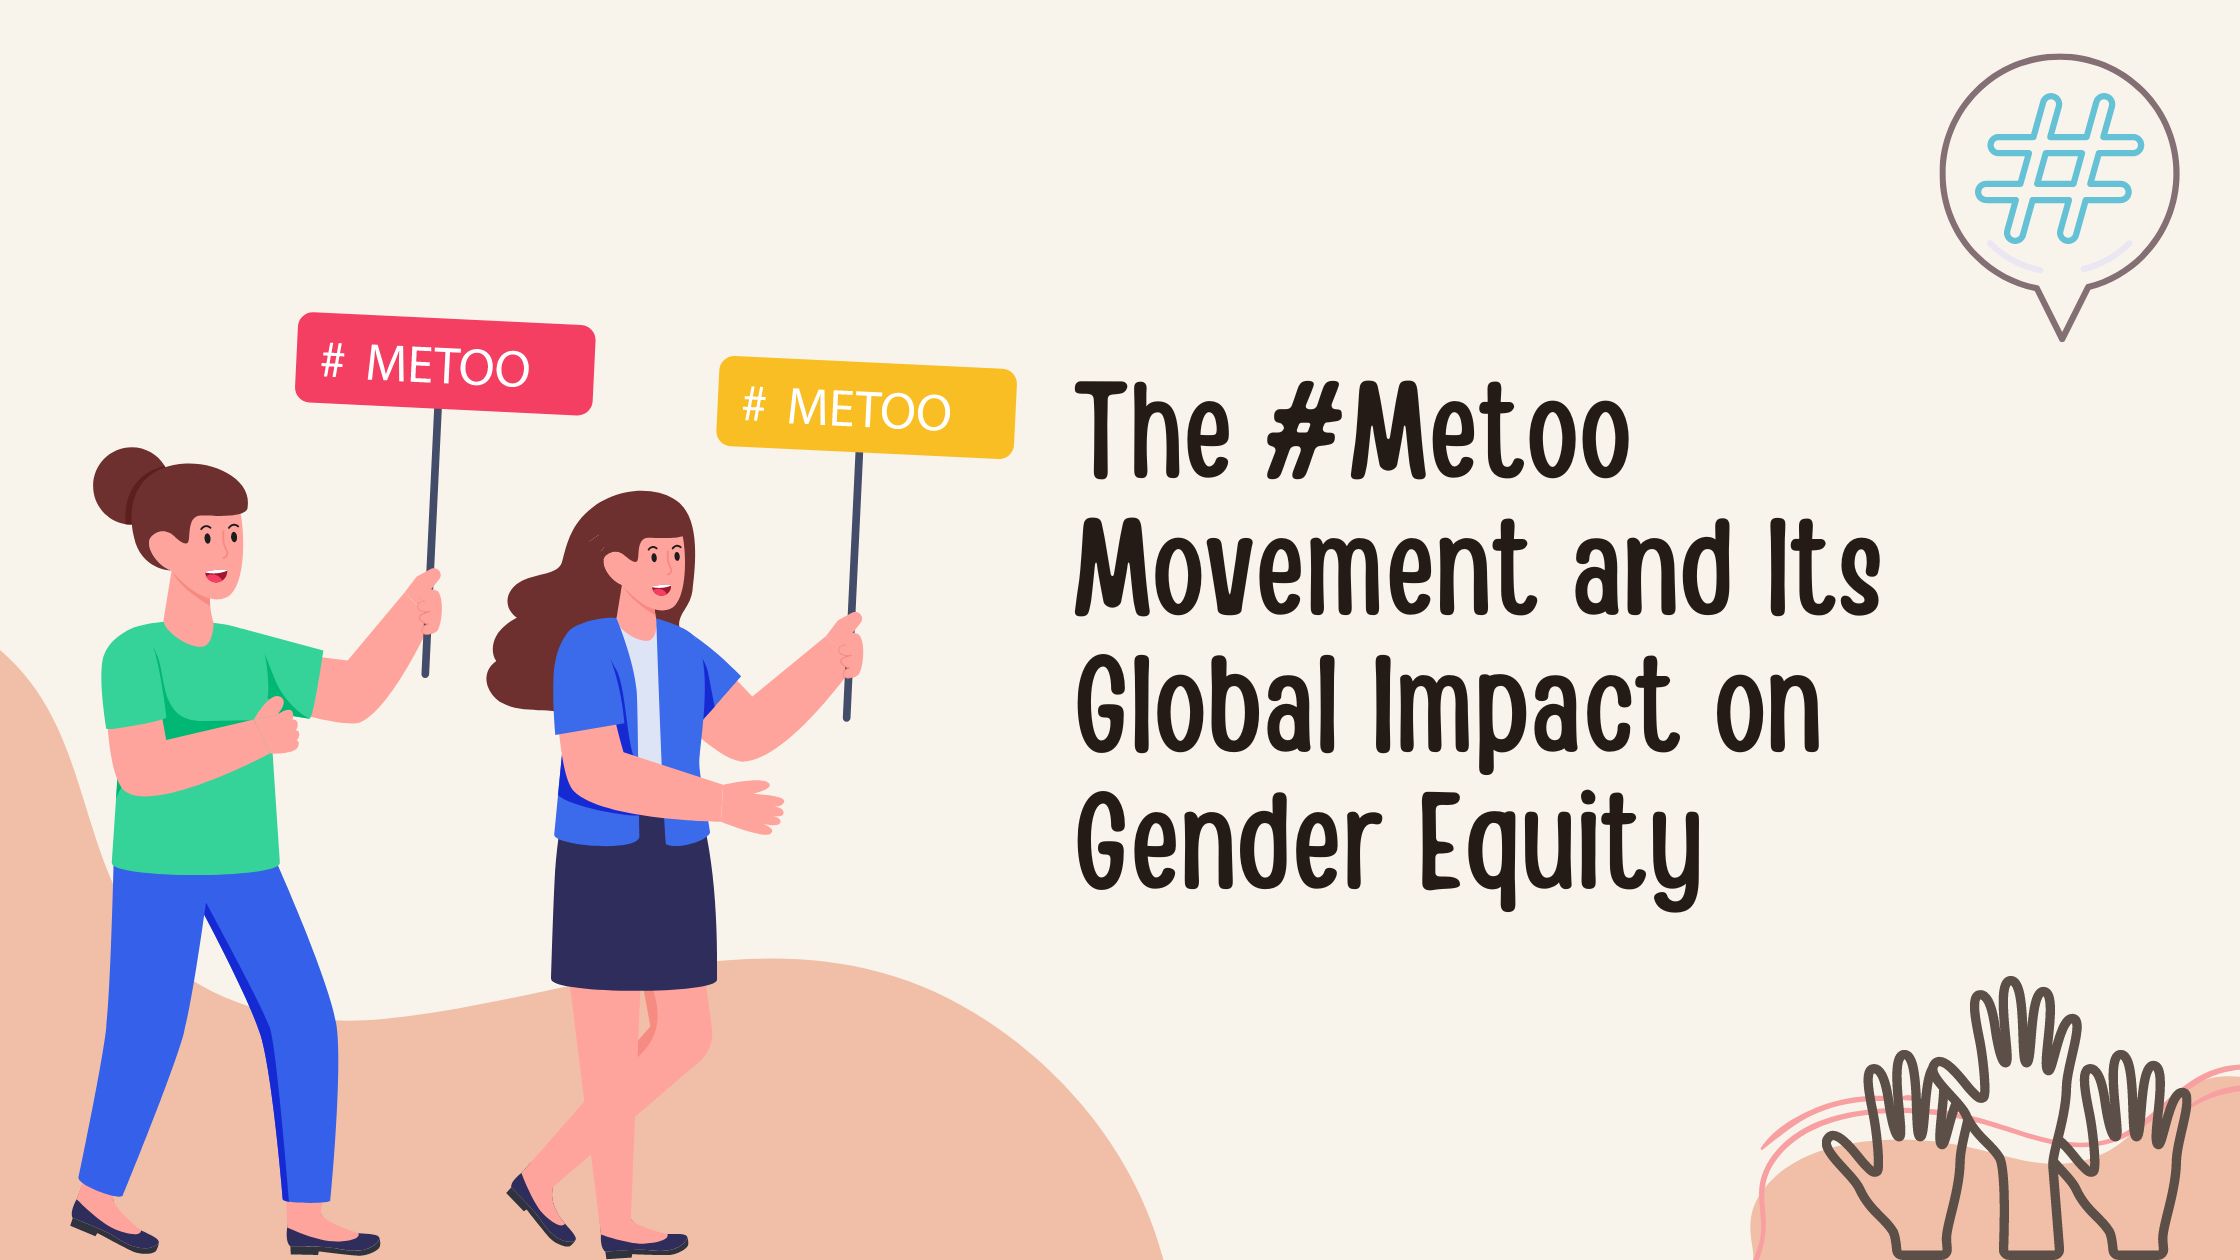 The #Metoo Movement and Its Global Impact on Gender Equity